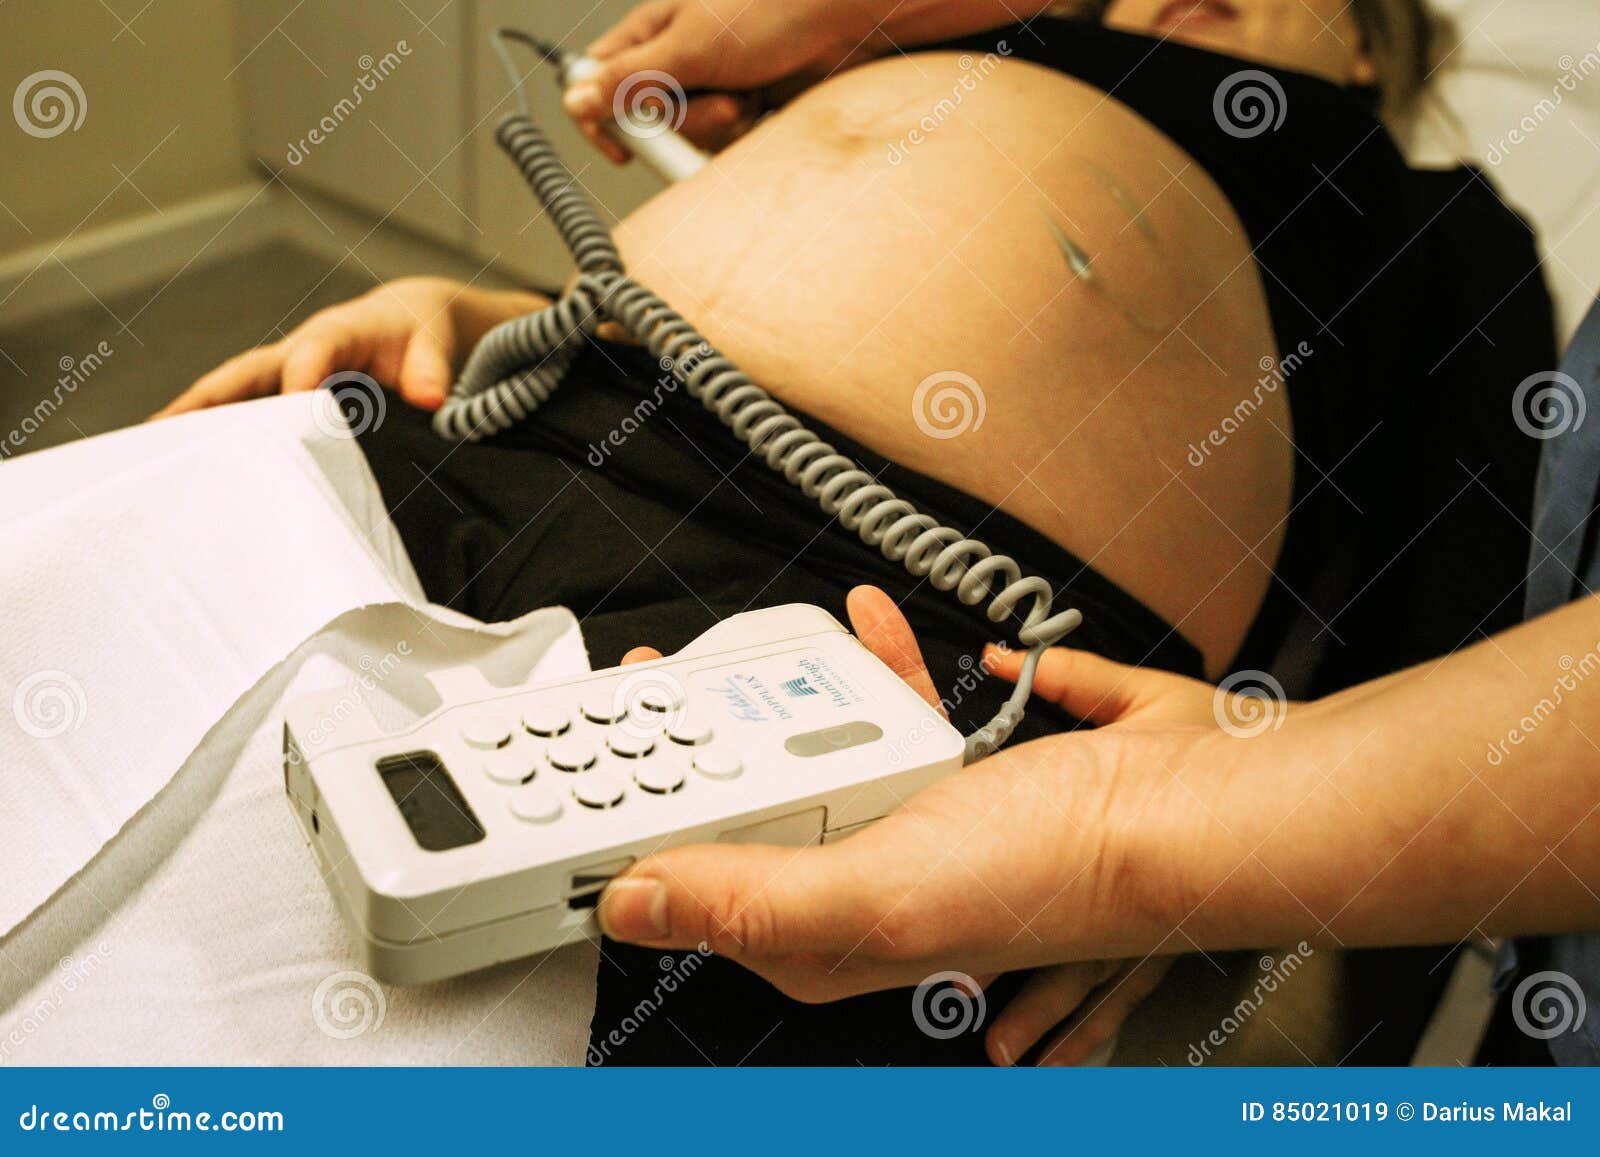 Pregnant Woman In Doctors Office Stock Image Image Of Exam Indust